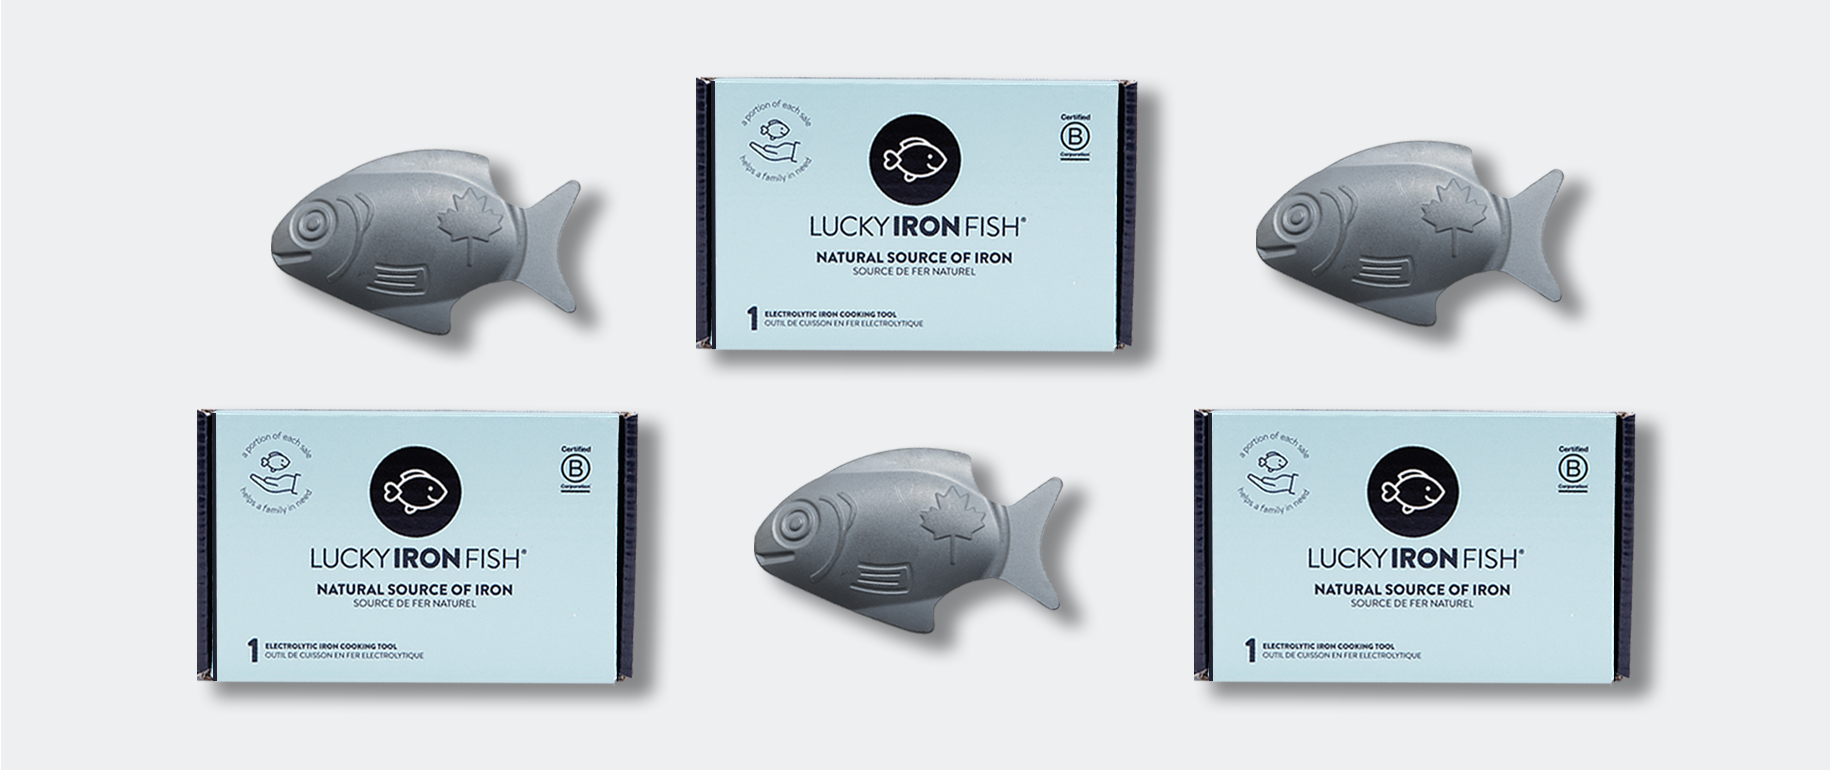 https://cdn.shopify.com/s/files/1/2007/5905/files/Lucky-Iron-Fish-3-pack-with-box-mobile.png?v=1696460822